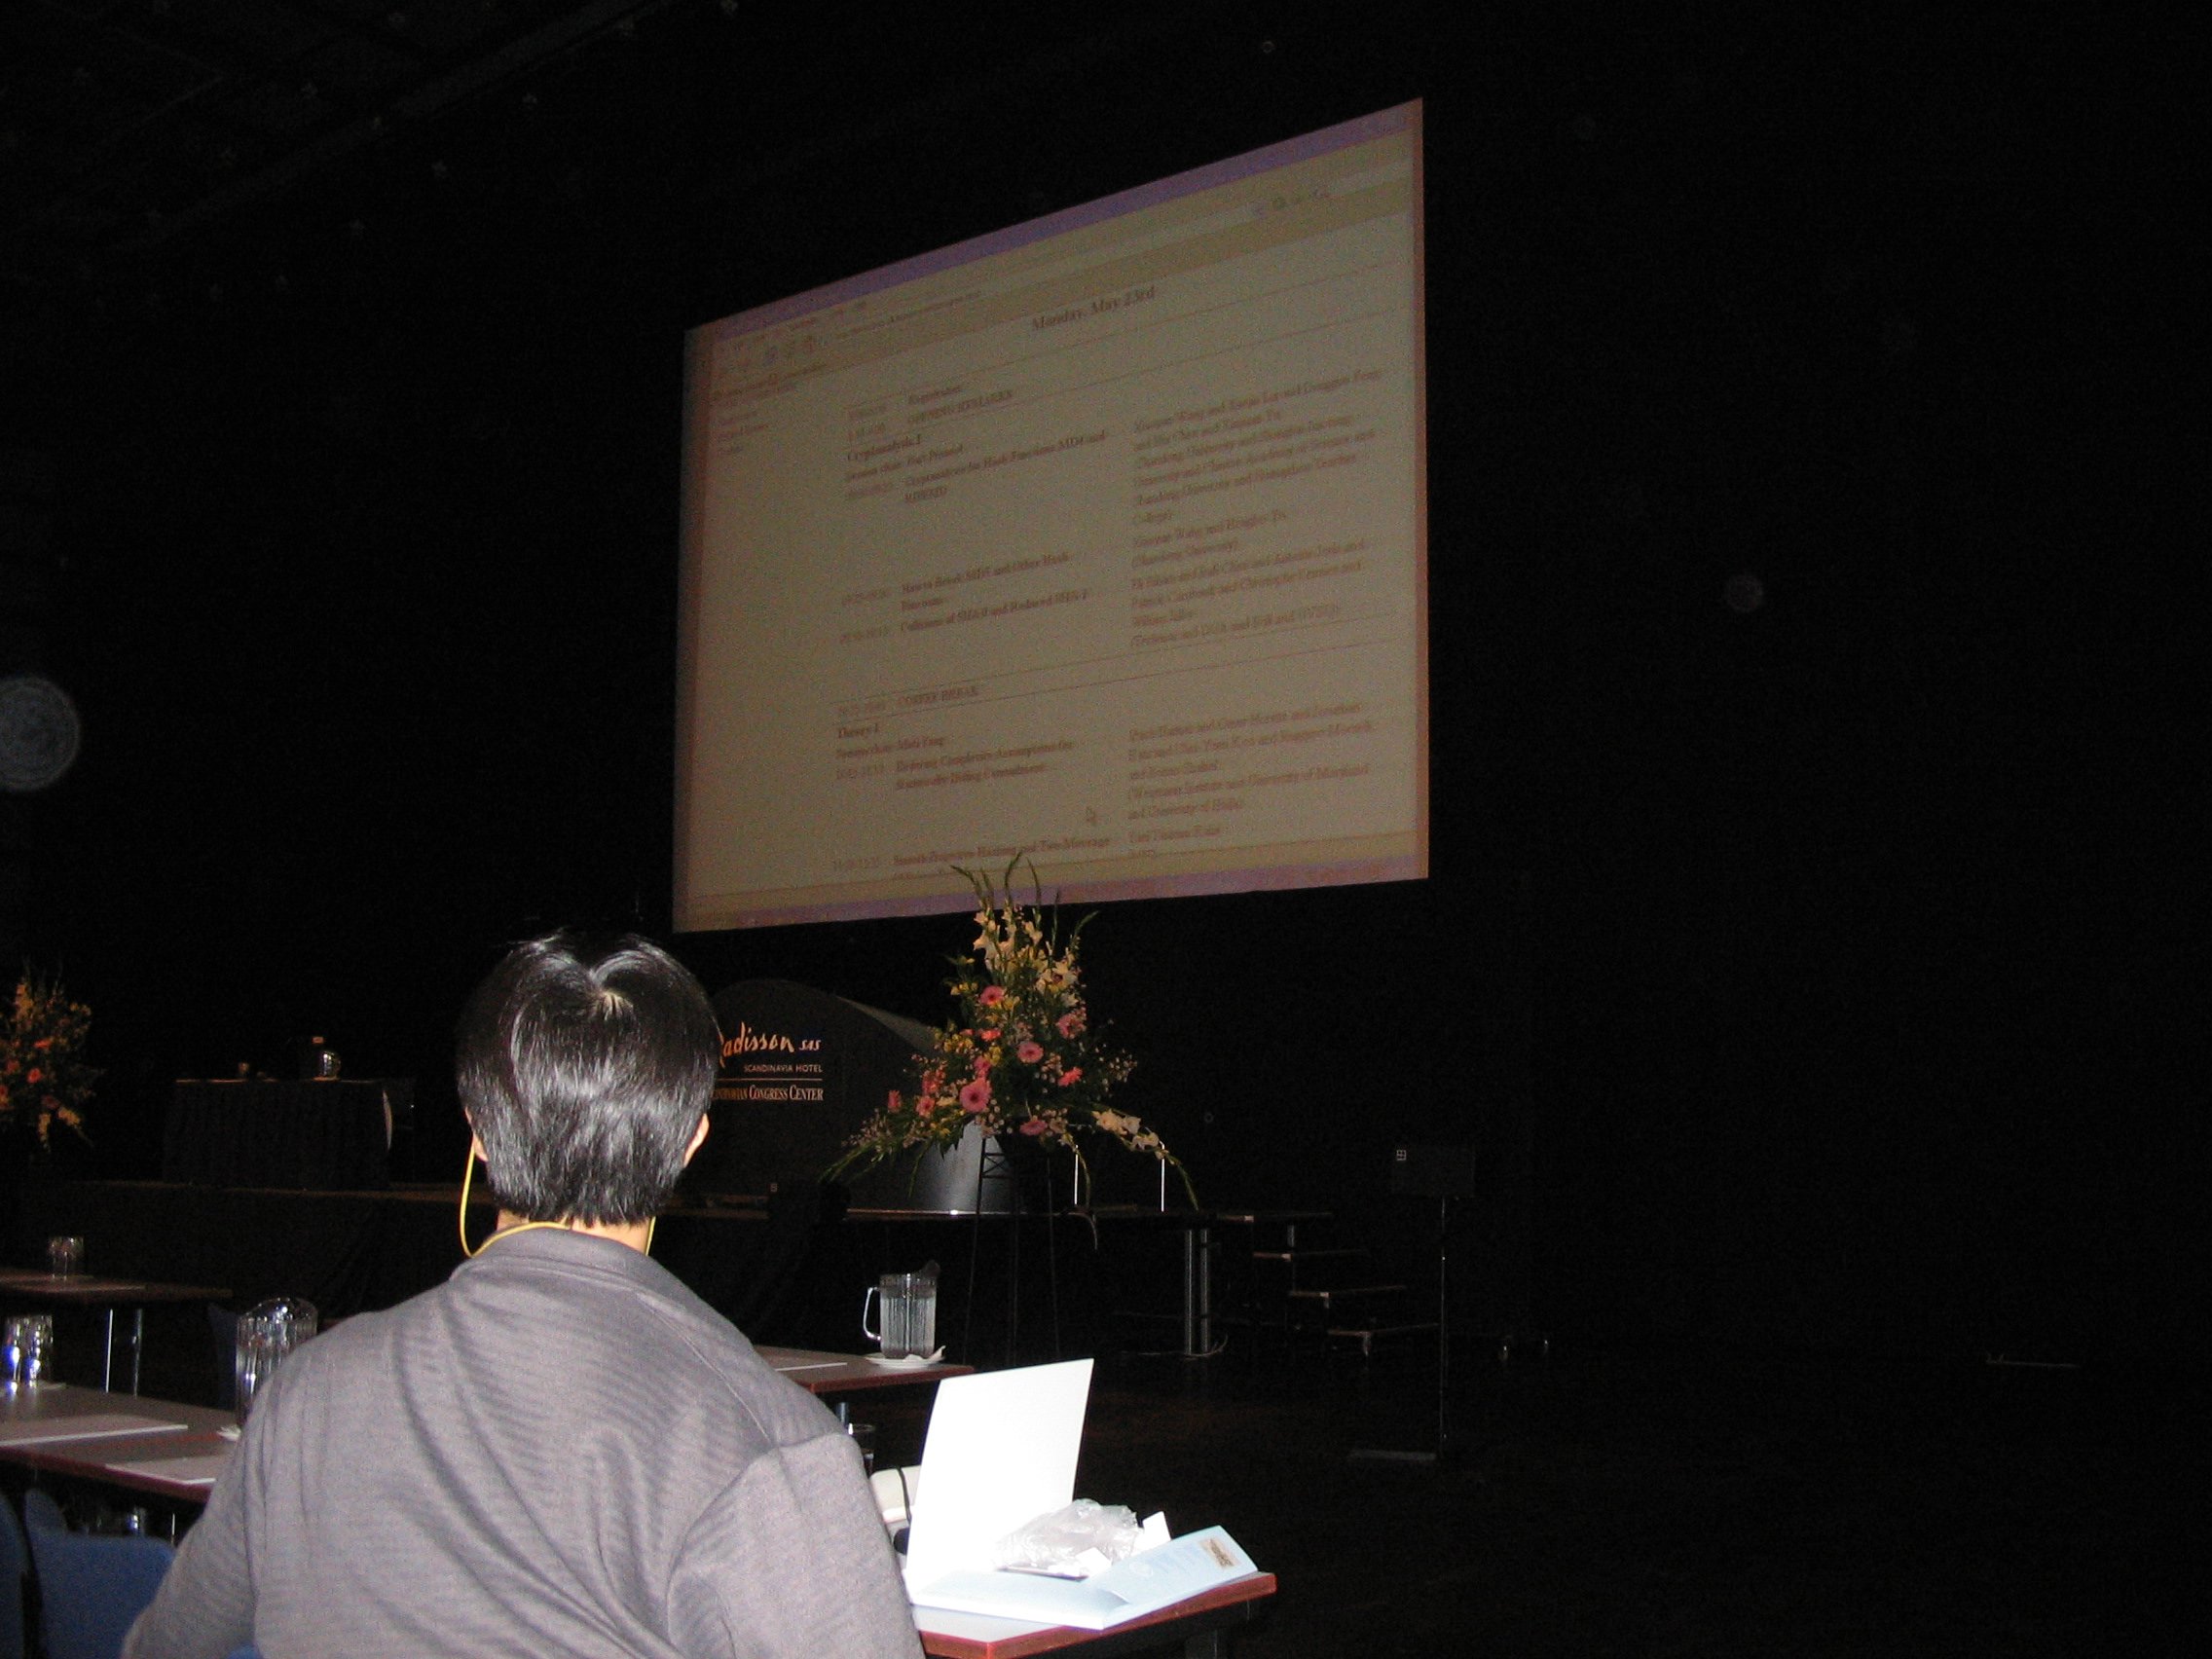 Picture from EuroCrypt 05